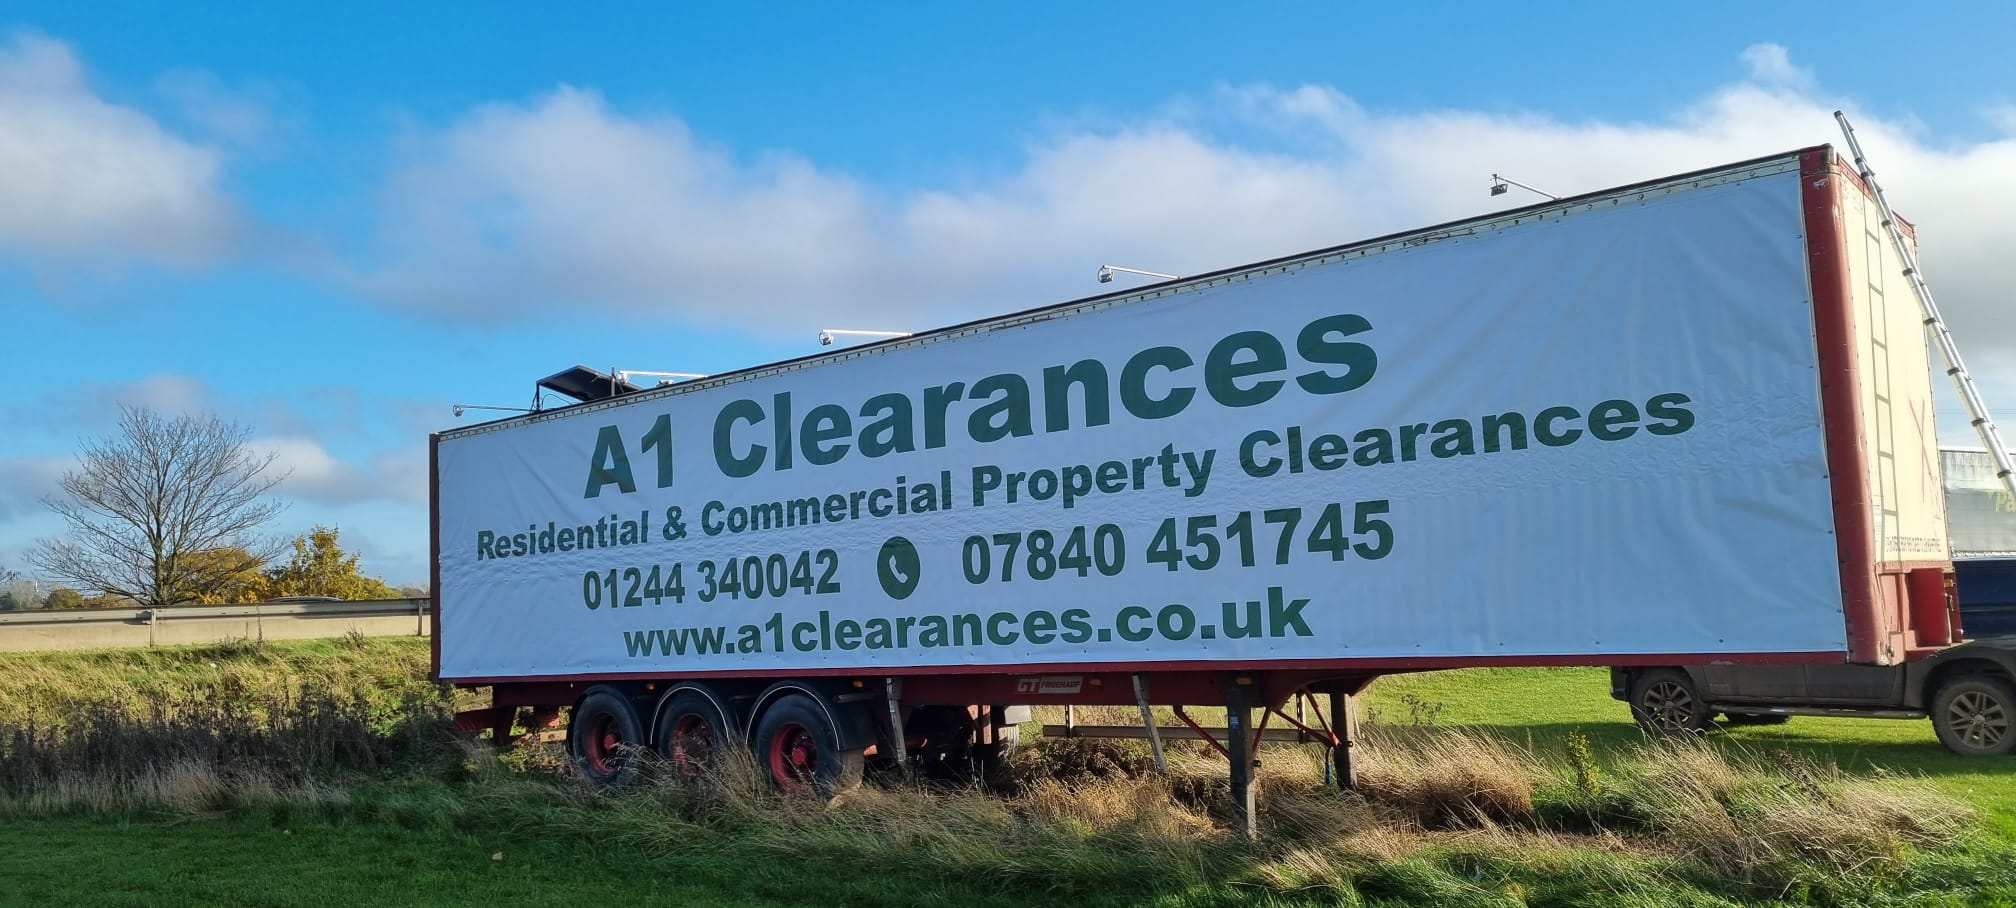 A1 Clearances - House Clearances  and Commercial & Residential Clearances in North Wales, Cheshire, Merseyside and more.